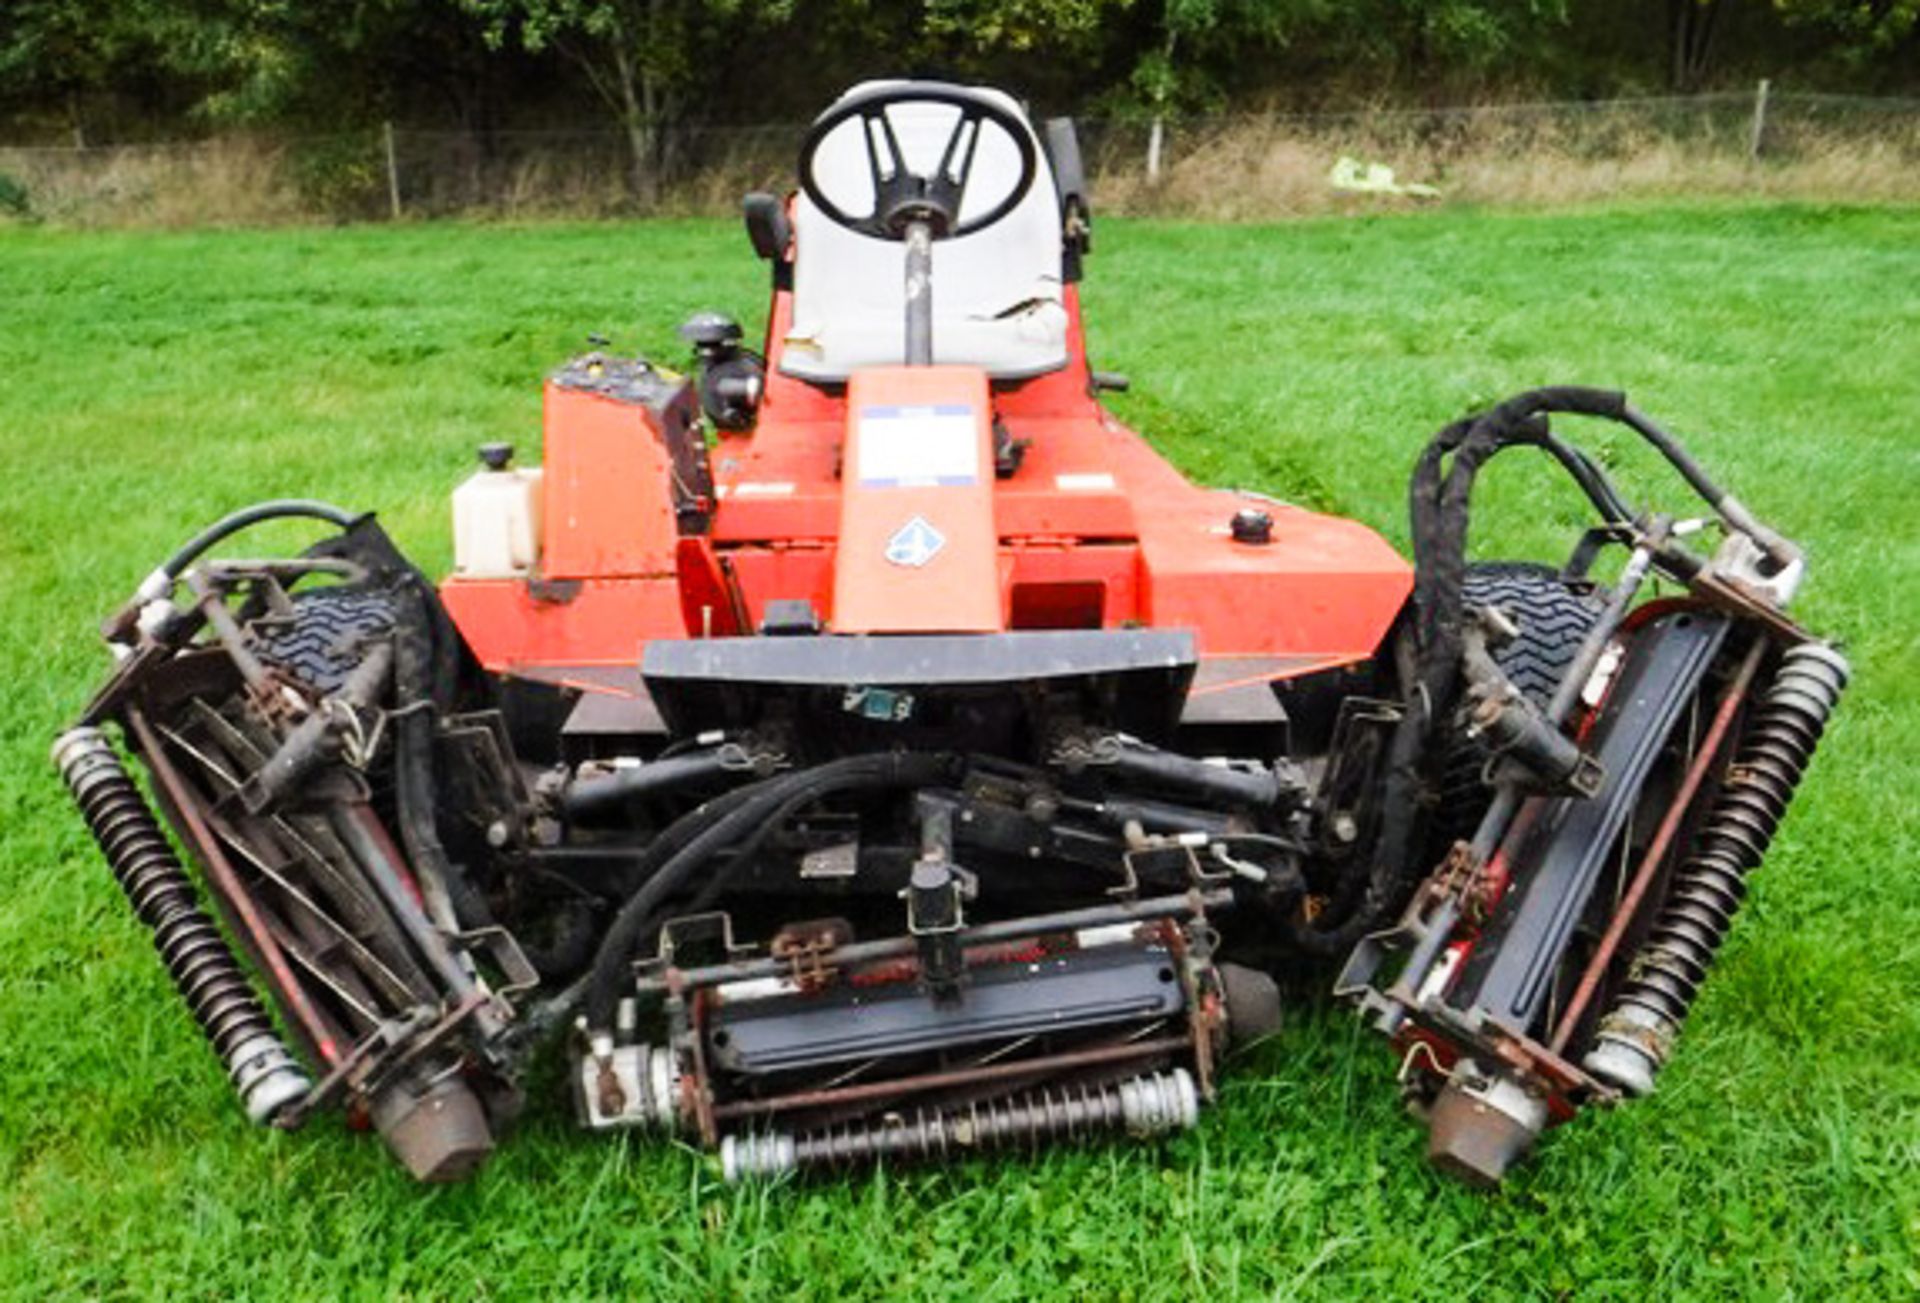 LF135 JACOBSEN FAIRWAY RIDE ON MOWER, 1647HRS (NOT VERIFIED) - Image 5 of 9